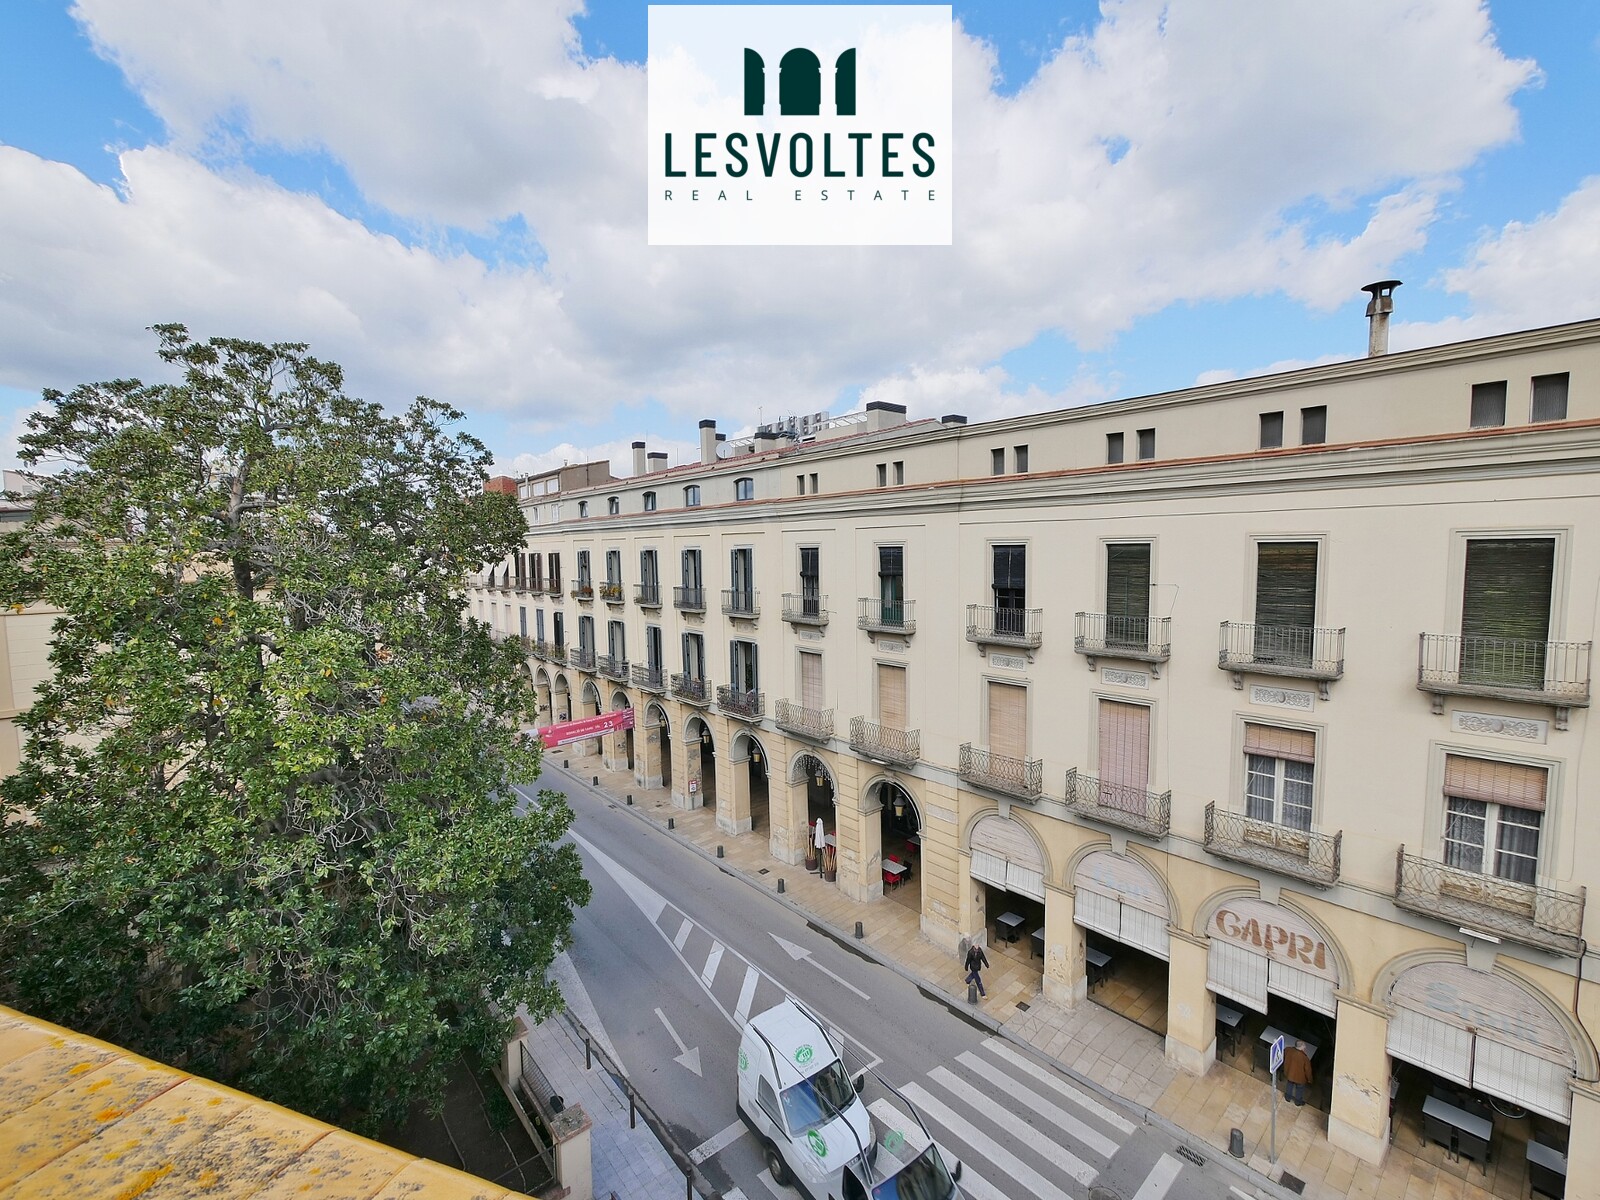 PREMISES ON THE GROUND FLOOR AND APARTMENT OF 210 M2, WITH A FLAT OF 110 M2 ON THE 2ND FLOOR AND ROOF, FOR RENT IN LA BISBAL.